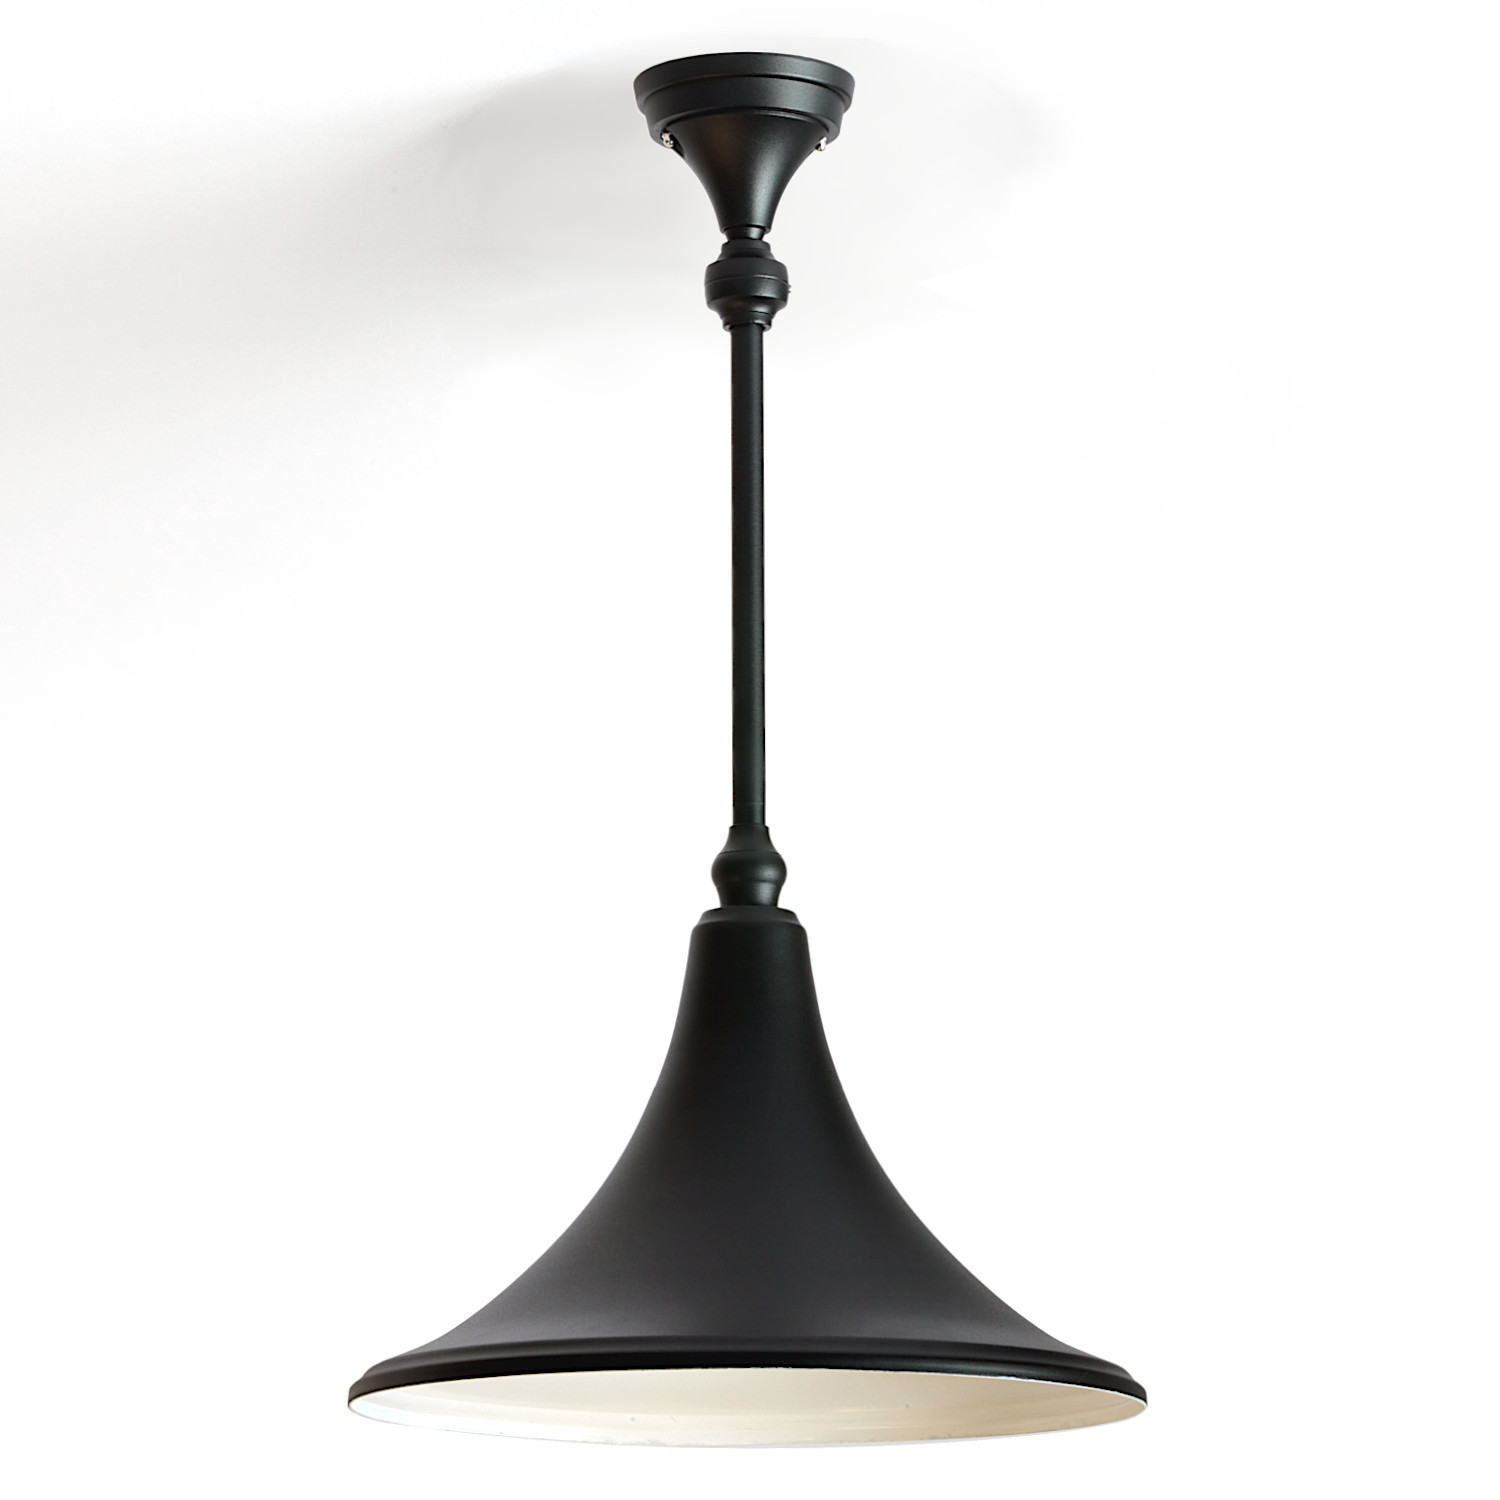 Ceiling Light for Outdoors with Canopy Shade